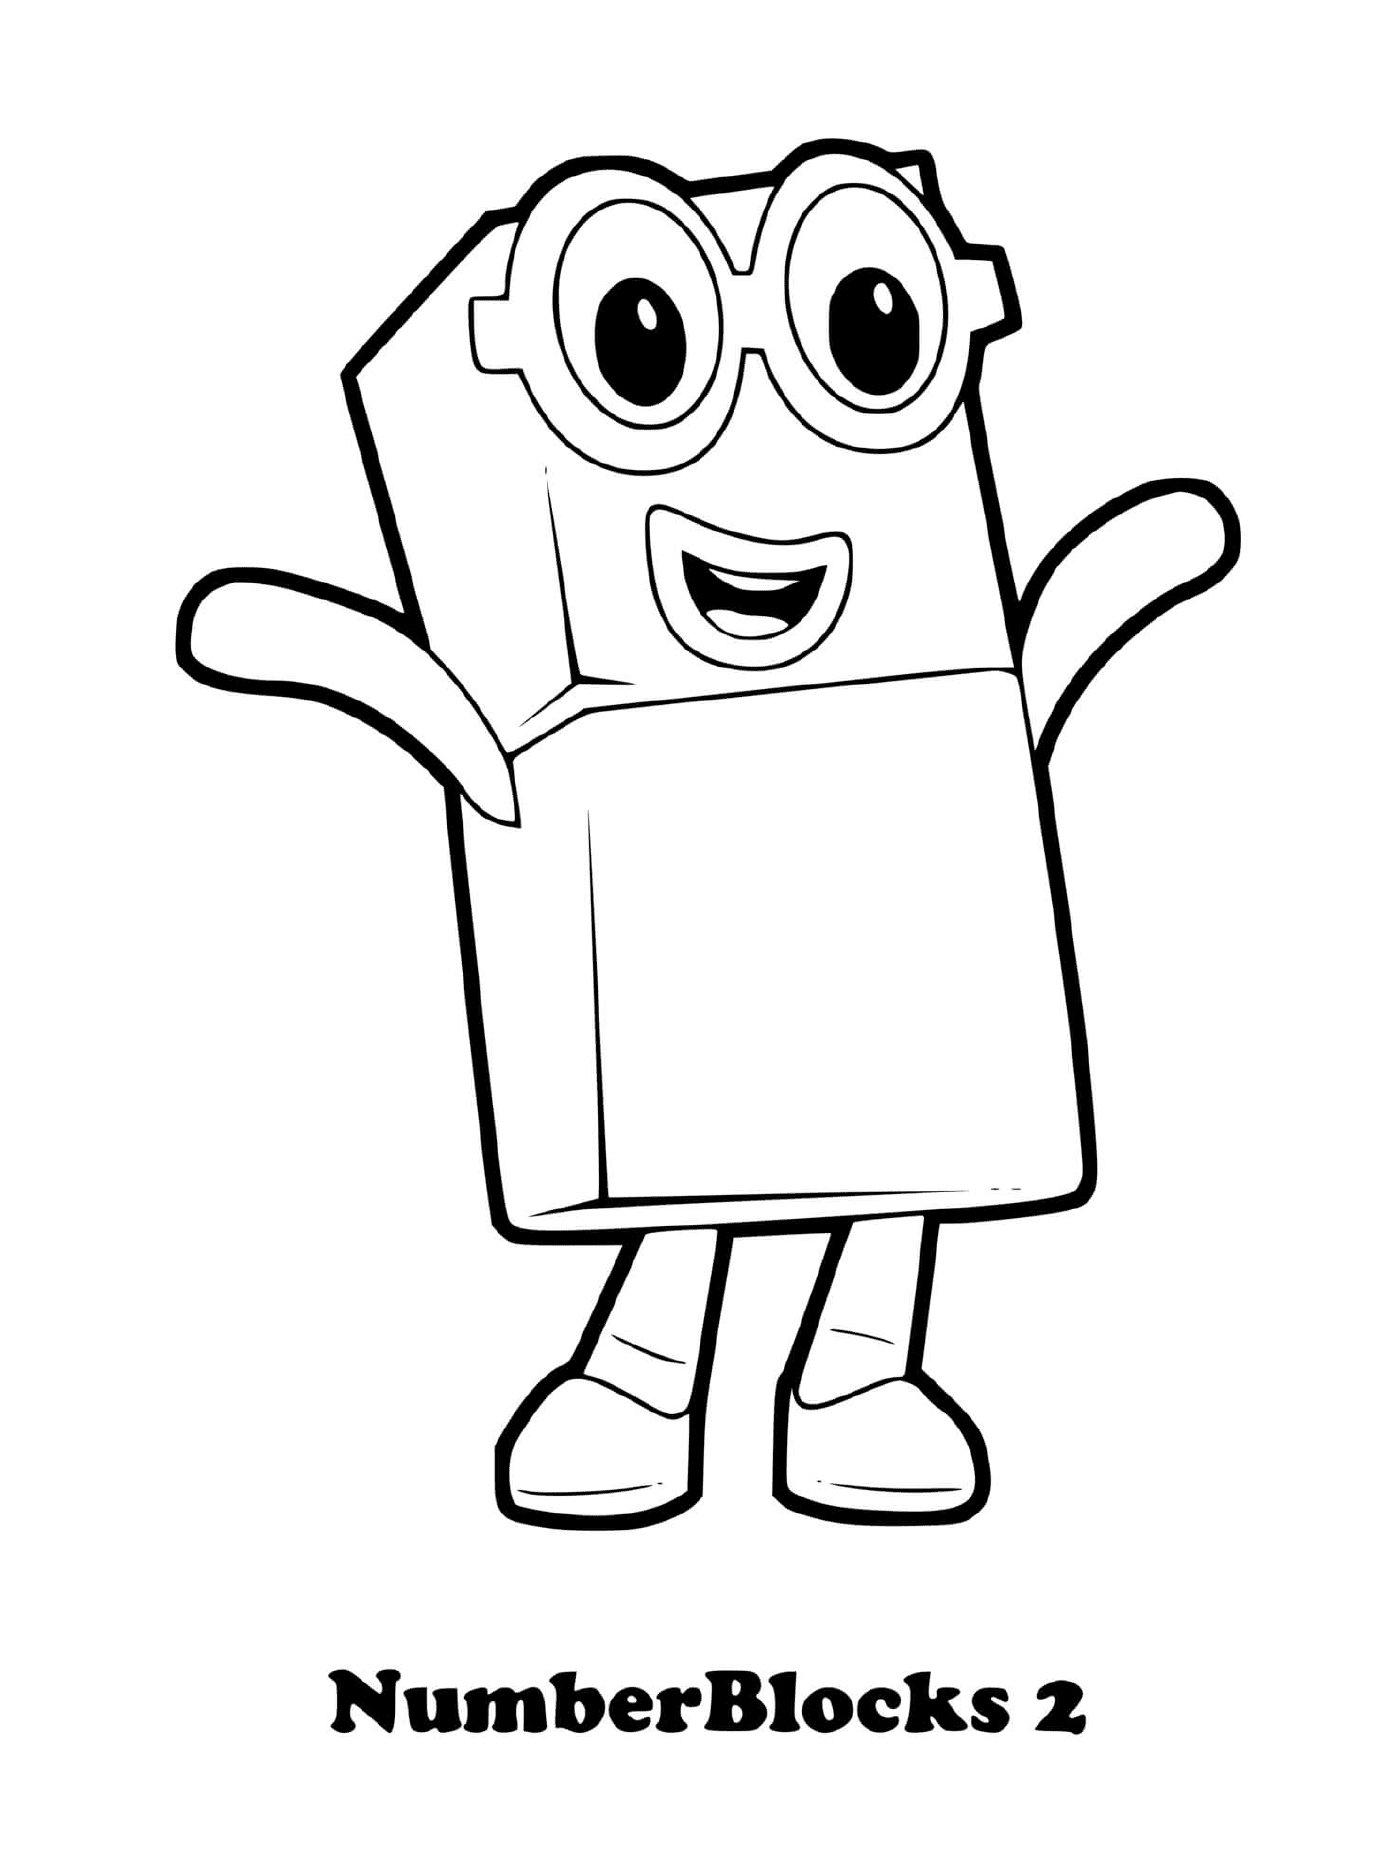  Numberblocks number 2, character in box 